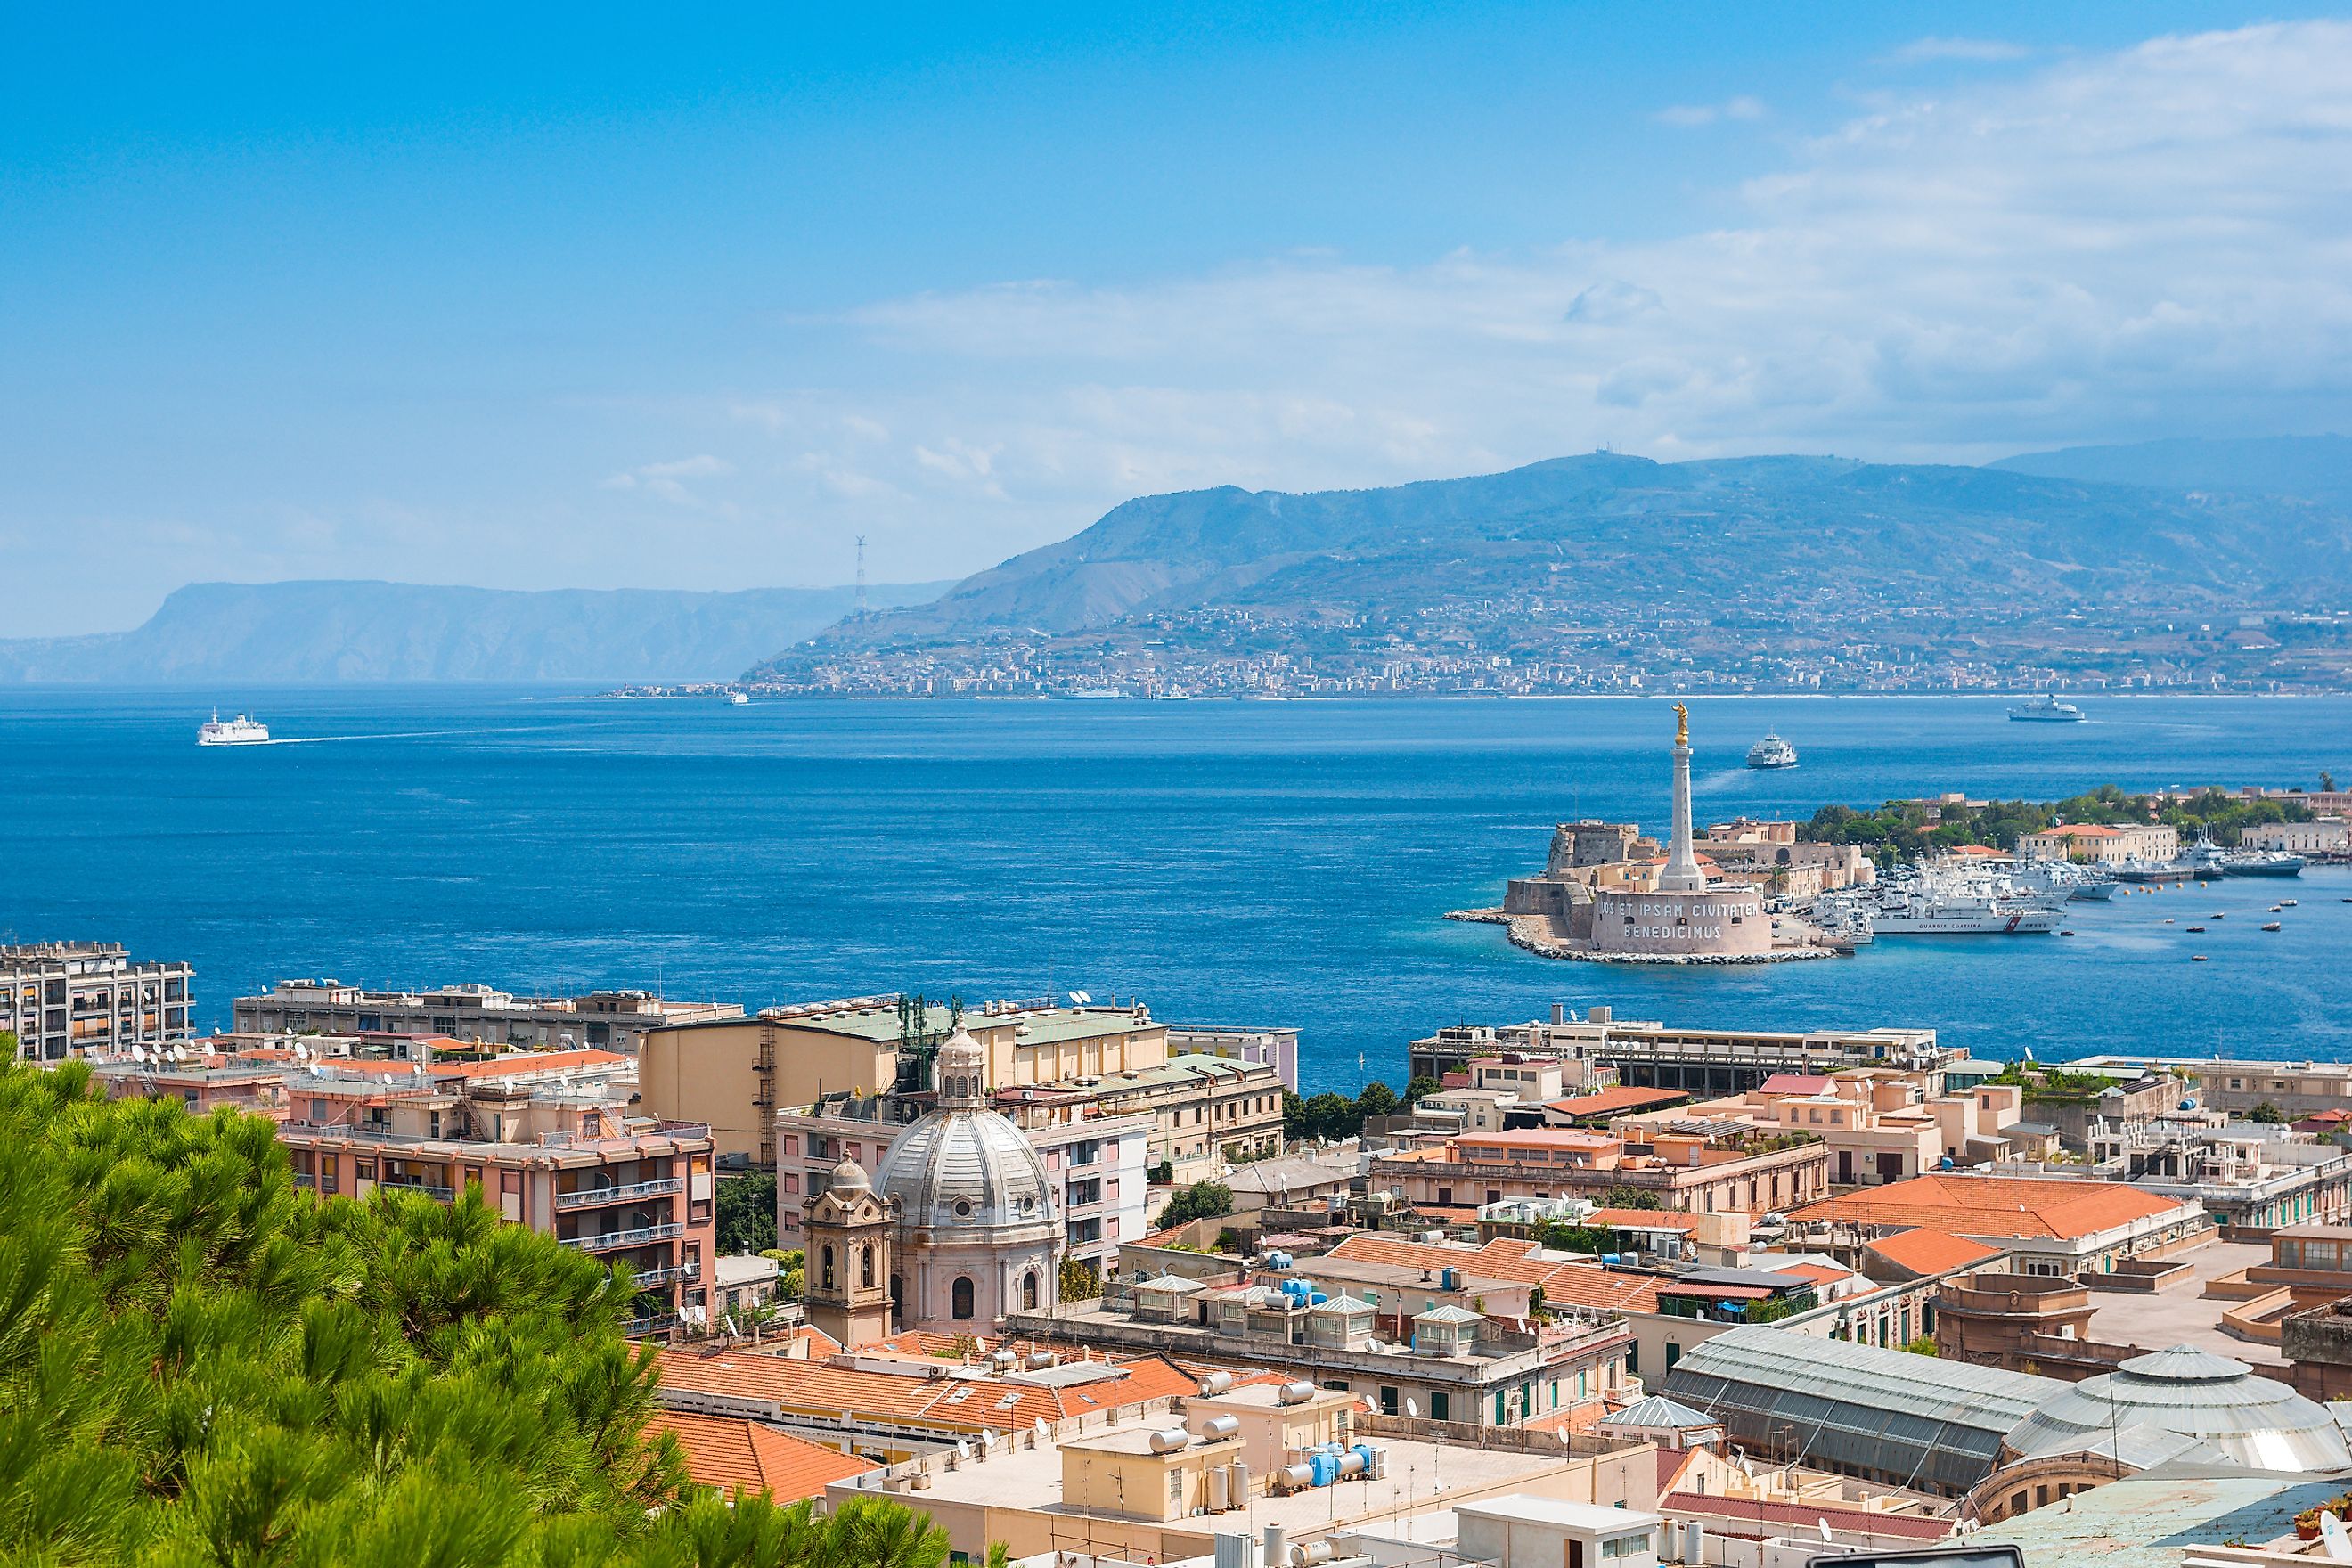 The Strait of Messina seen from Messina, Sicily.